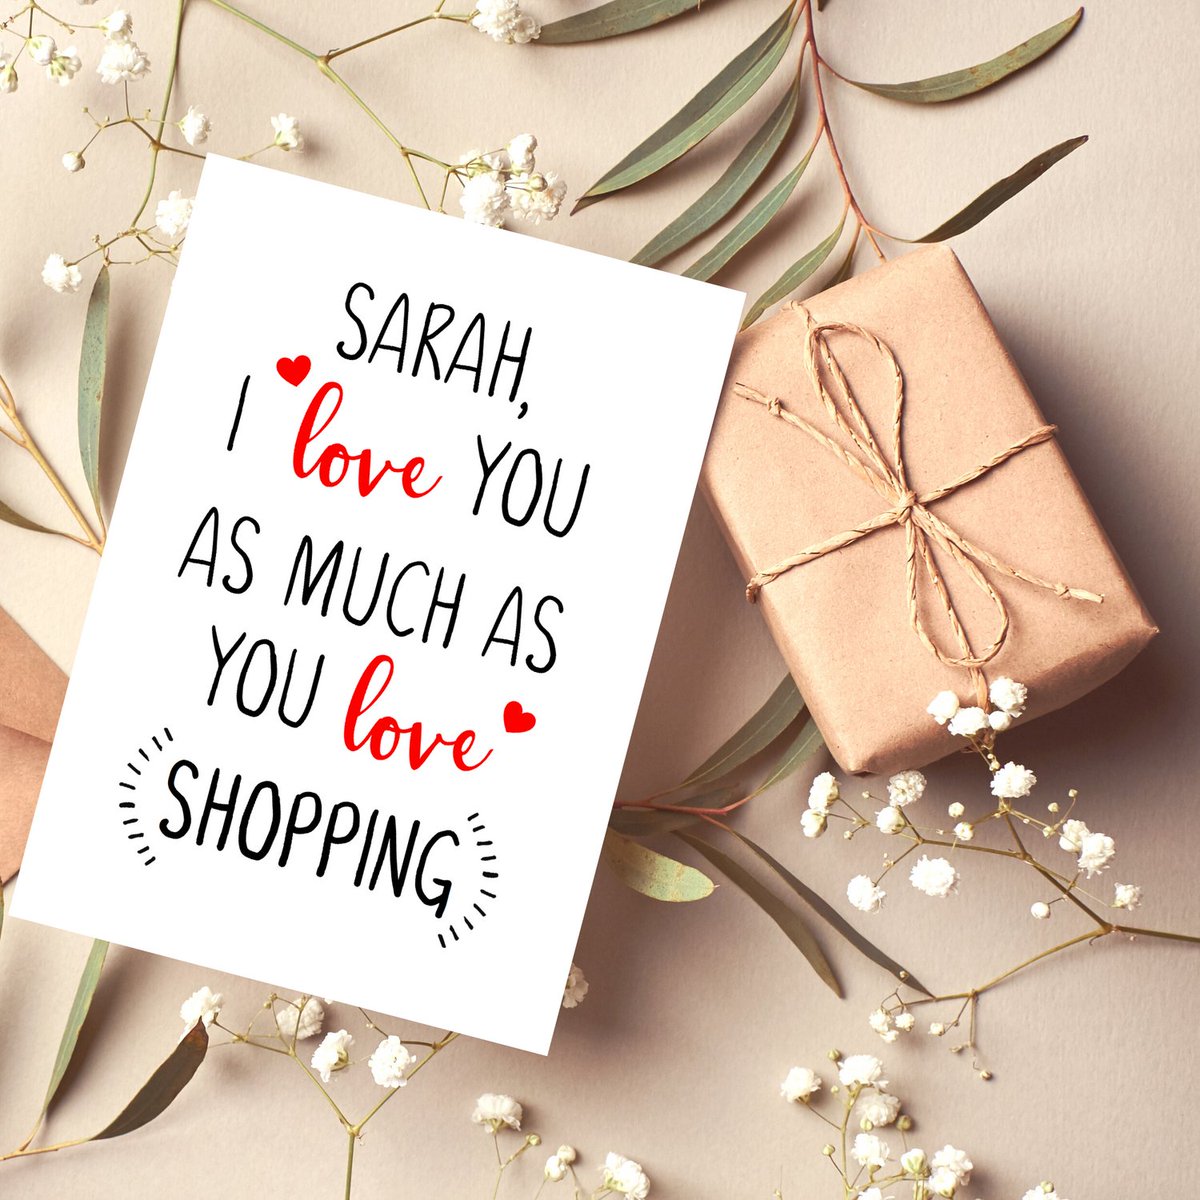 These personalised valentines day cards come with the words at the top and bottom of the card changed to say whatever you'd like. 
#personalisedgreetingscard #valentinescard #valentinesdayideas #valentinesgifts #greetingscards #personalisedcard #Iloveyoucard